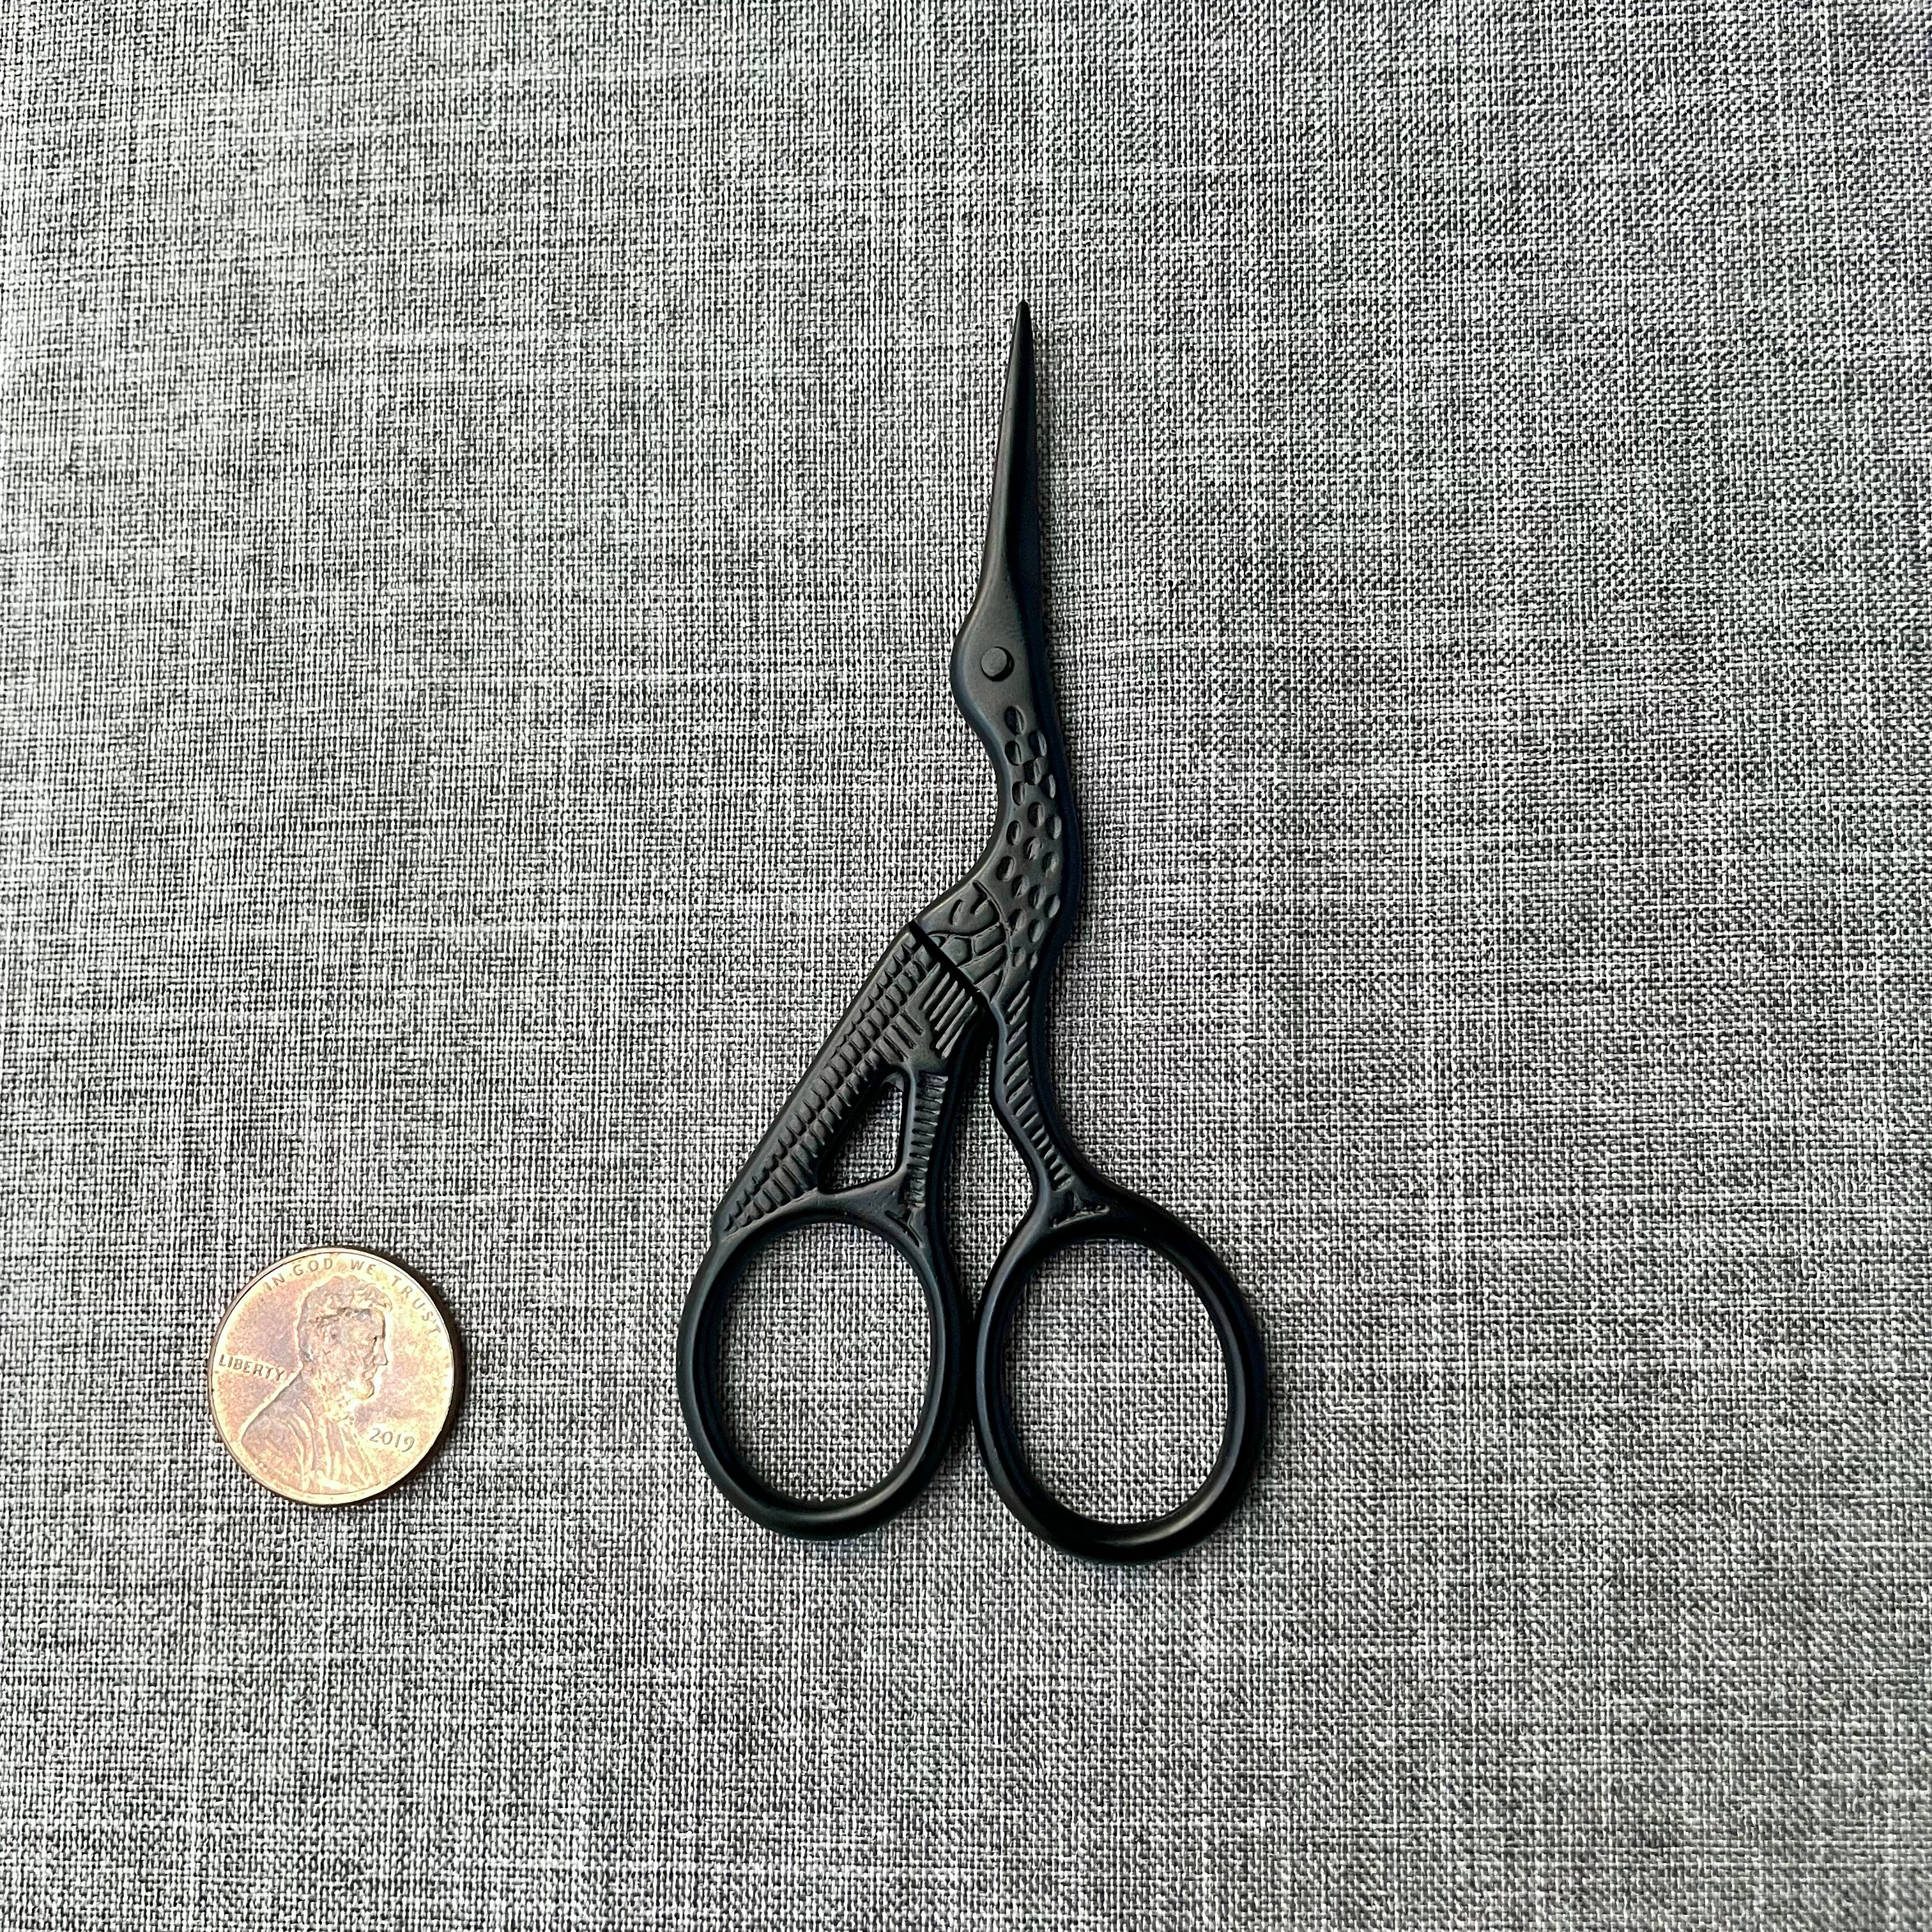 Modern Black Scissors with penny beside for size reference - Wedding Flat lay props from Champagne & GRIT